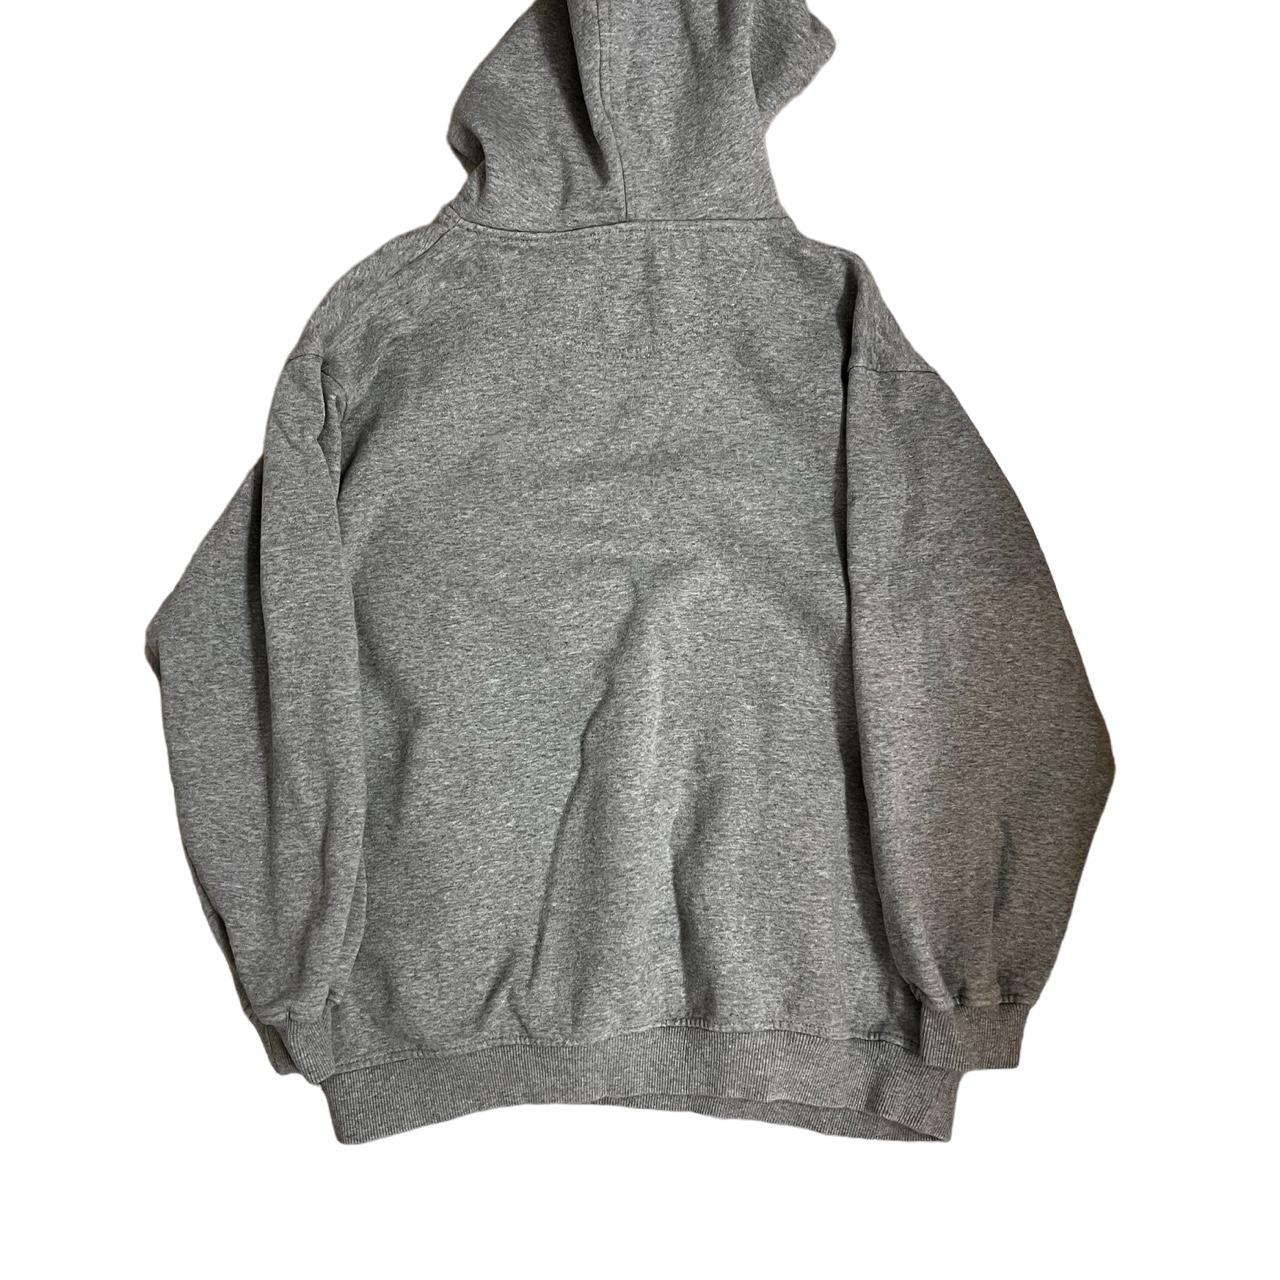 awesome grey southpole hoodie tagged a size... - Depop